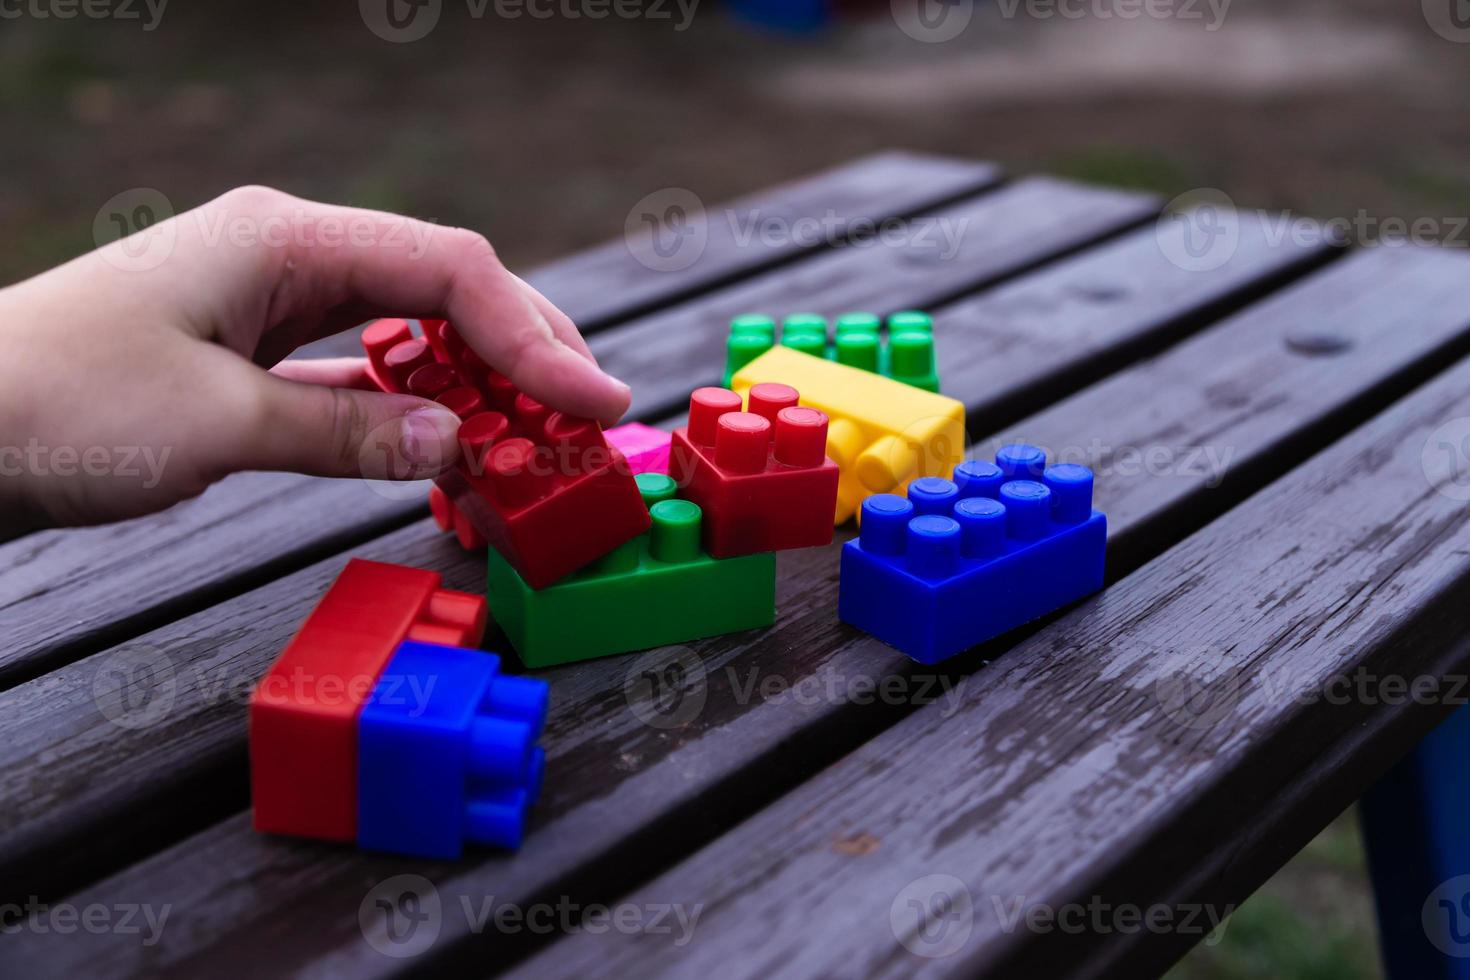 Colorful toy building blocks photo